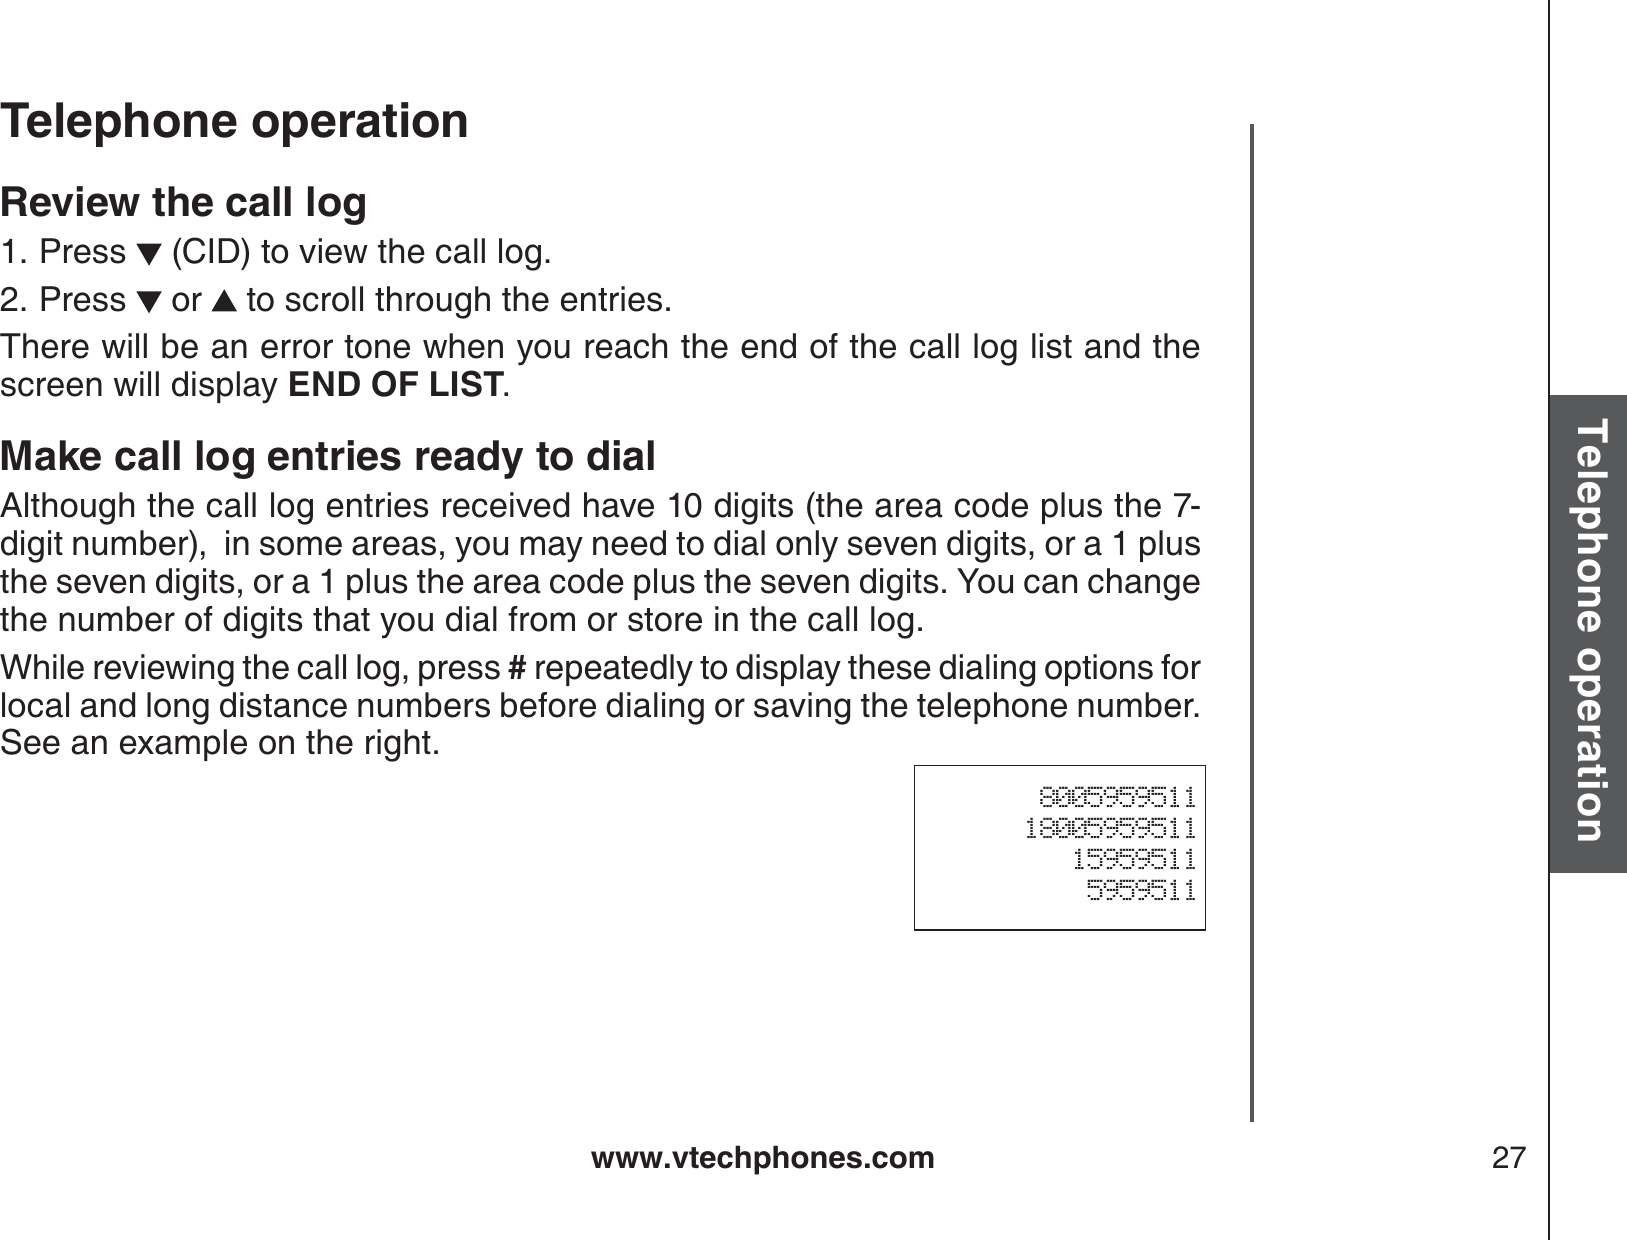 www.vtechphones.com 27Basic operationTelephone operationTelephone operationReview the call logPress   (CID) to view the call log. Press   or   to scroll through the entries.There will be an error tone when you reach the end of the call log list and the screen will display END OF LIST.Make call log entries ready to dialAlthough the call log entries received have 10 digits (the area code plus the 7-digit number),  in some areas, you may need to dial only seven digits, or a 1 plus the seven digits, or a 1 plus the area code plus the seven digits. You can change the number of digits that you dial from or store in the call log.   While reviewing the call log, press # repeatedly to display these dialing options for local and long distance numbers before dialing or saving the telephone number.  See an example on the right.1.2.800595951118005959511159595115959511